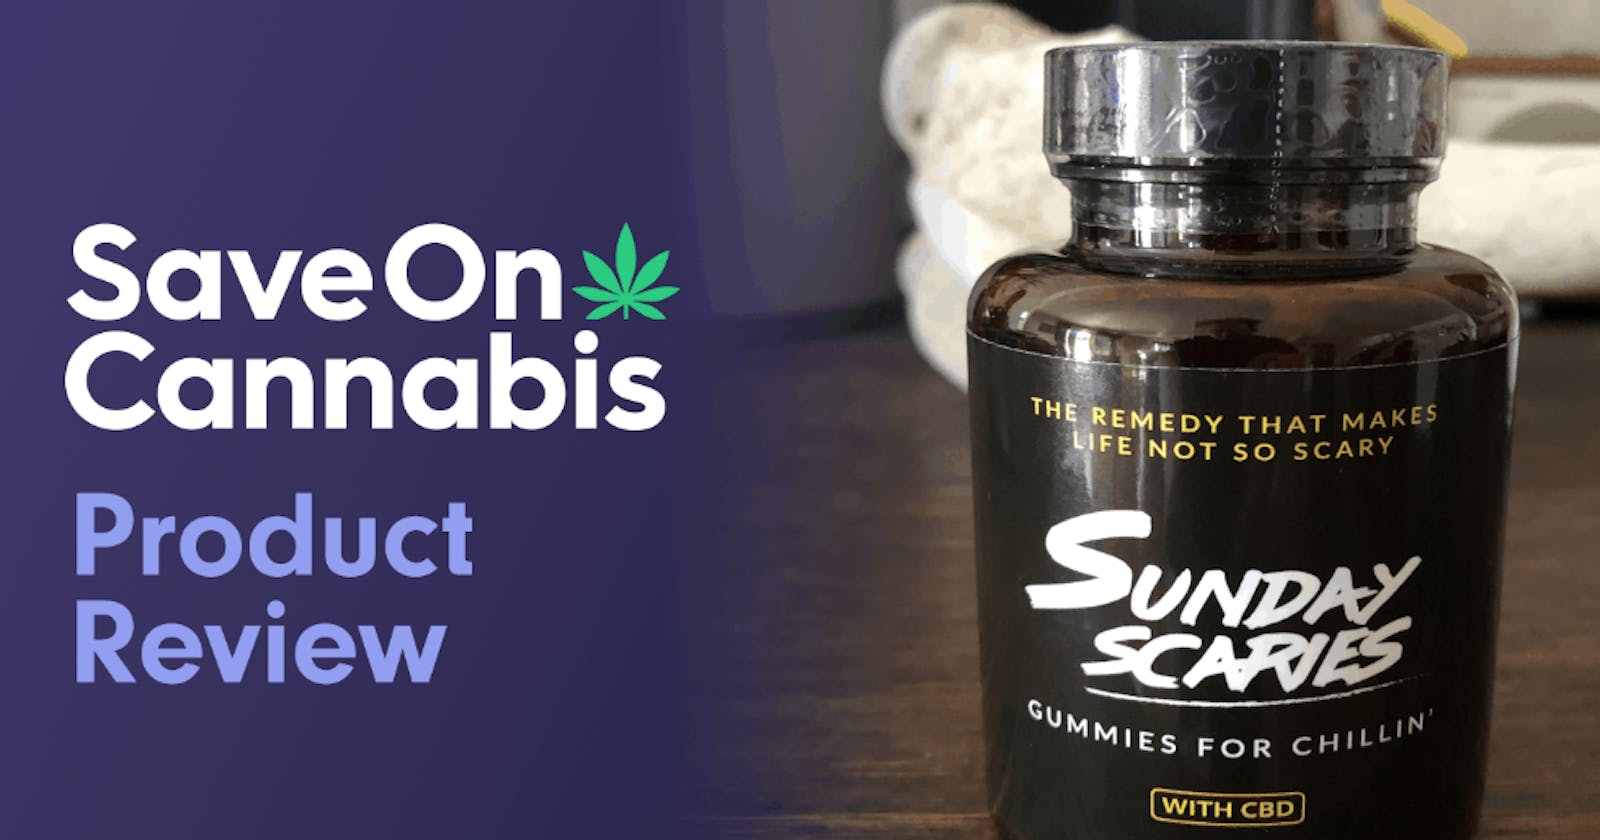 Relax and unwind with Sunday Scaries CBD-infused Gummies